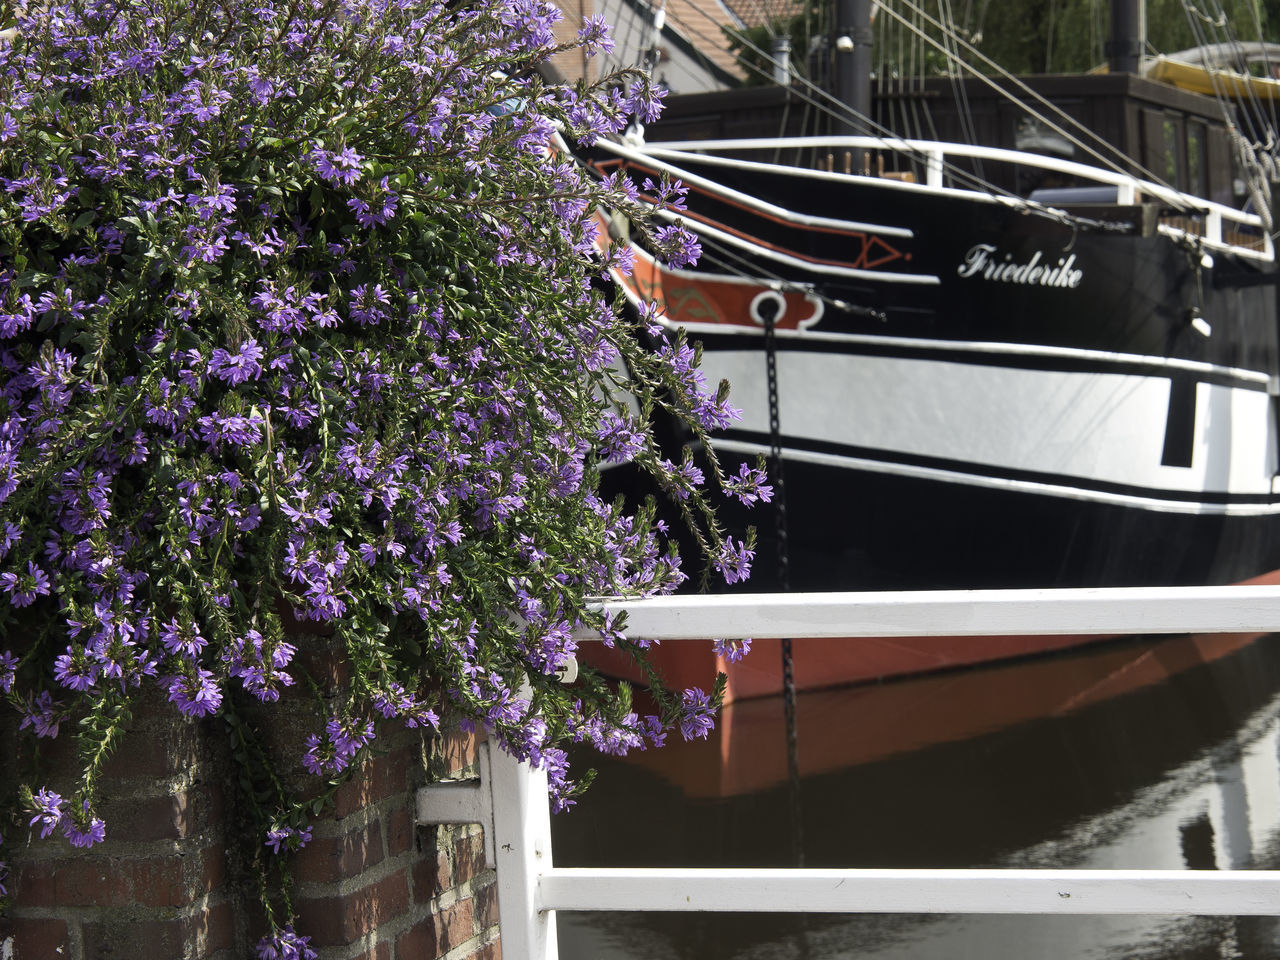 plant, flowering plant, flower, nature, growth, day, no people, mode of transportation, boat, architecture, transportation, built structure, nautical vessel, vehicle, ship, beauty in nature, building exterior, watercraft, outdoors, tree, freshness, purple, water, fragility, moored